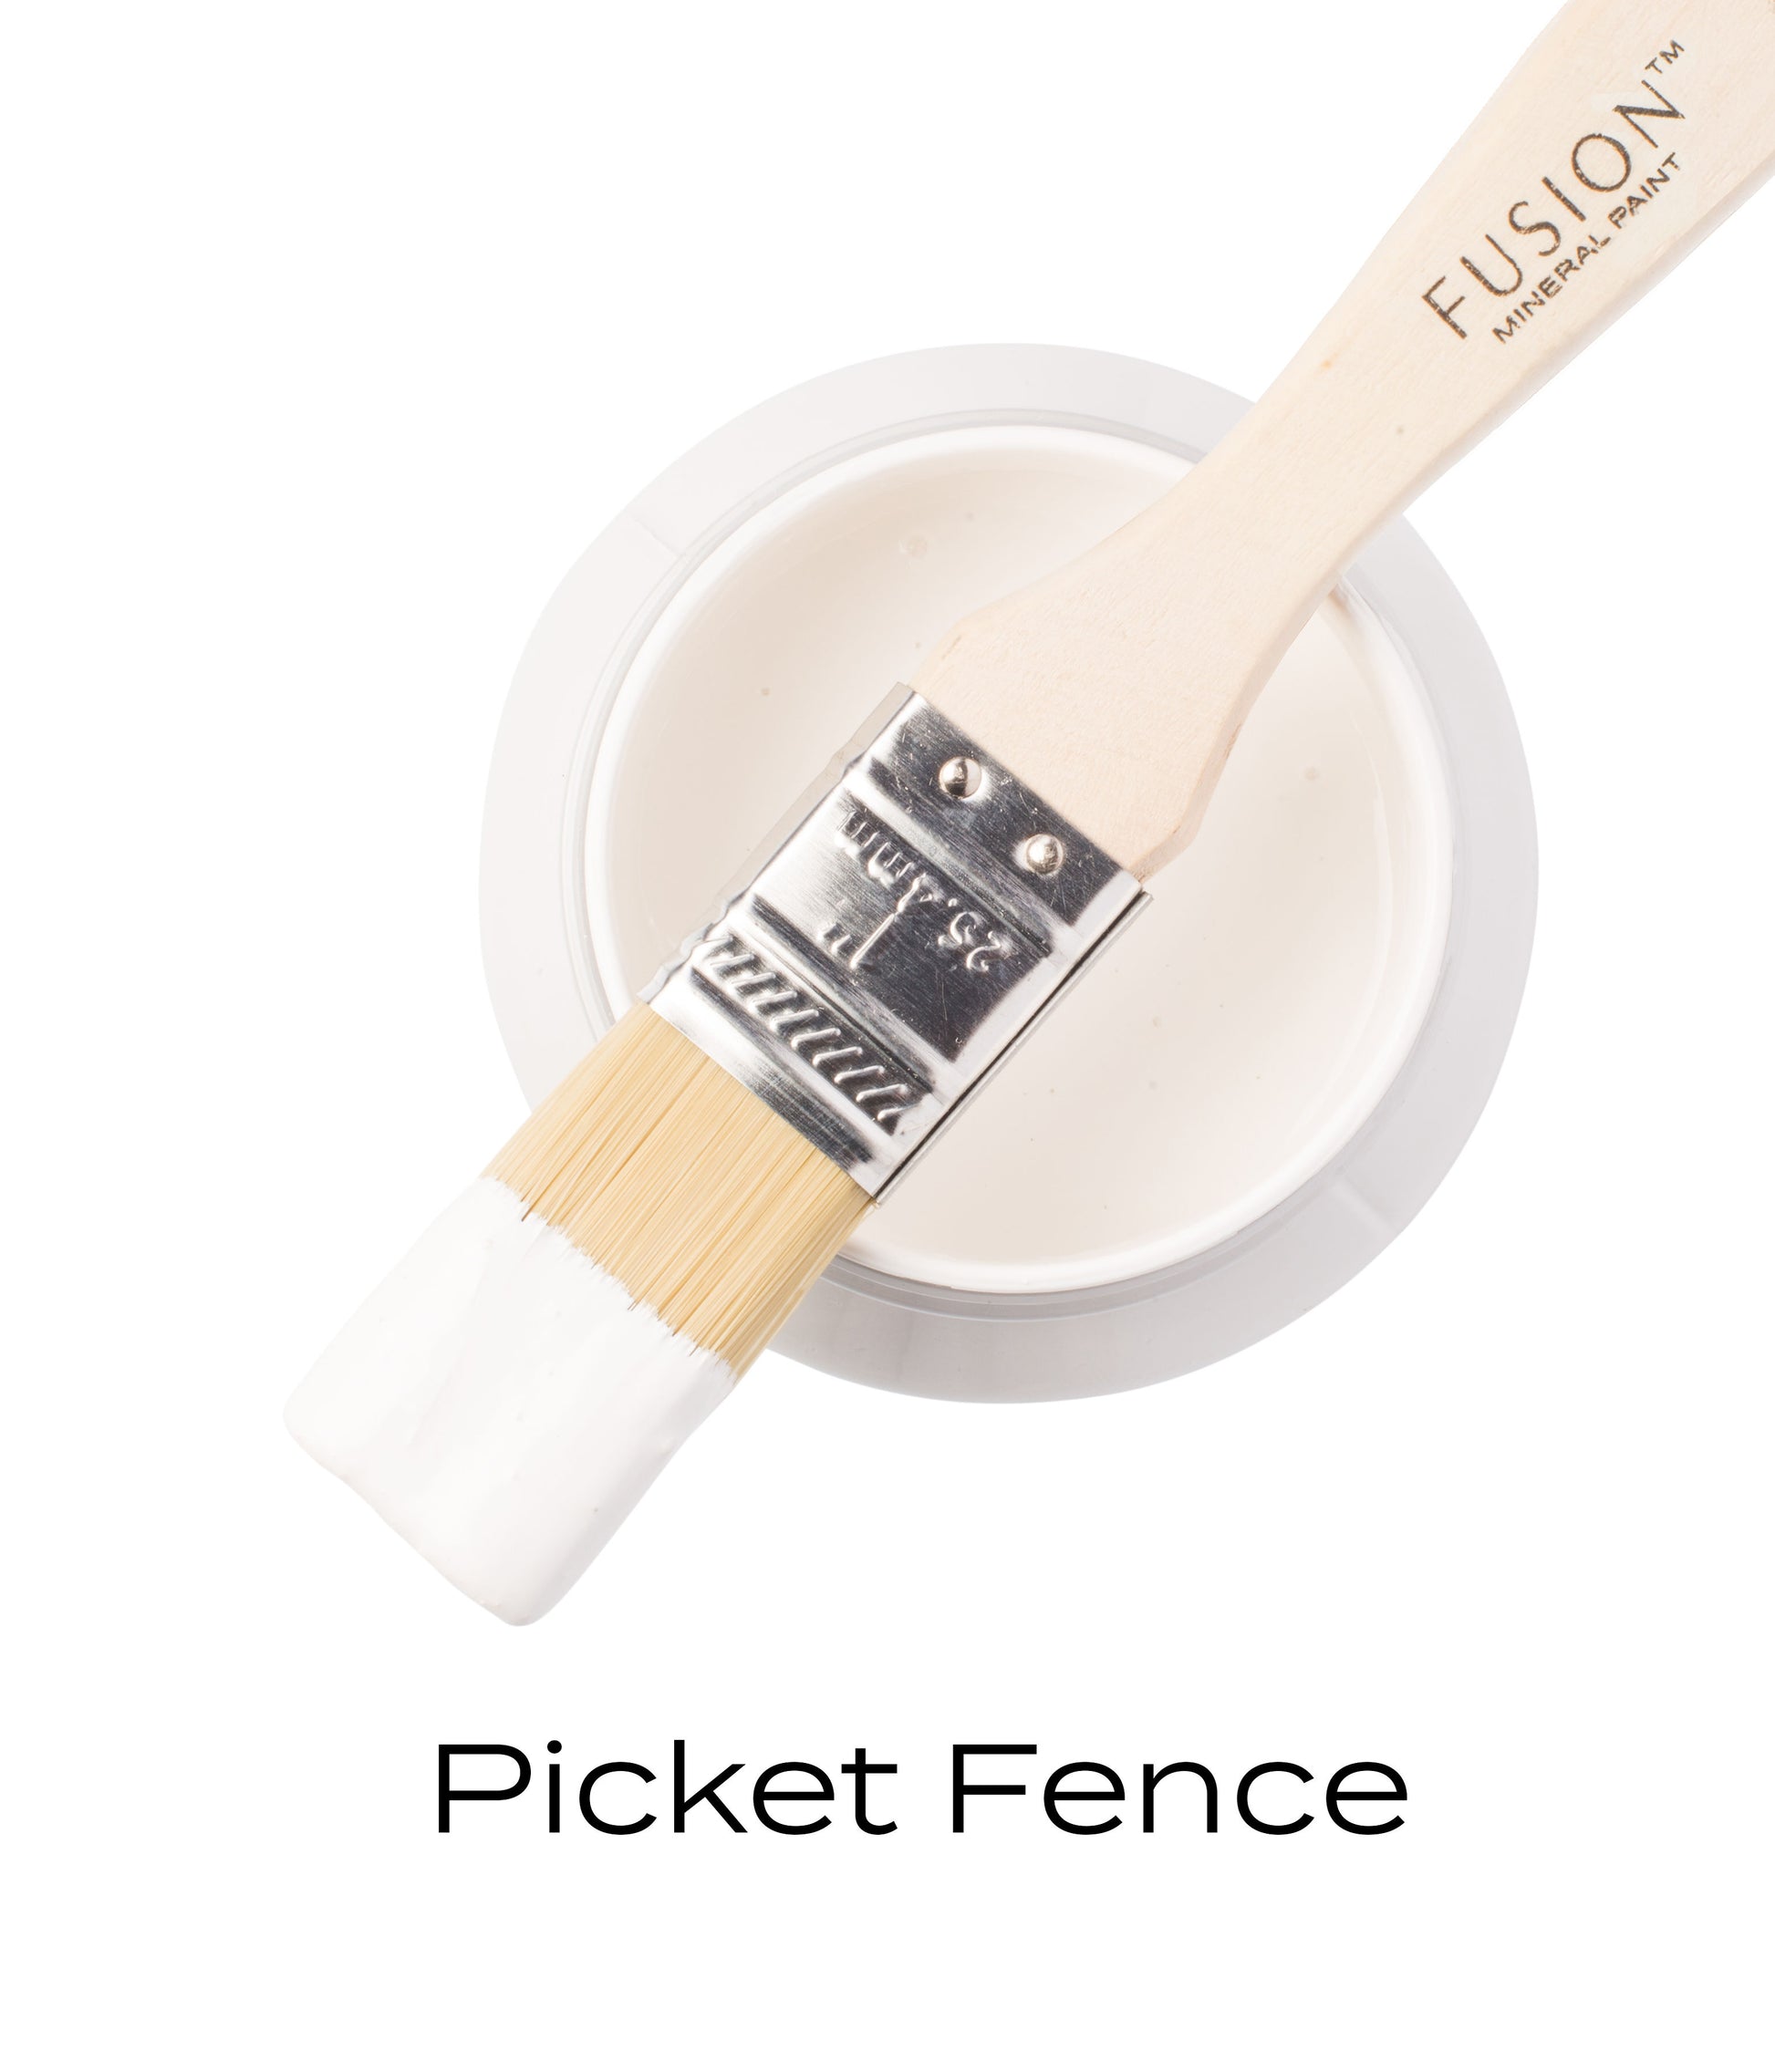 Fusion Mineral Paint Picket Fence The 3rd Wheel Studio online store